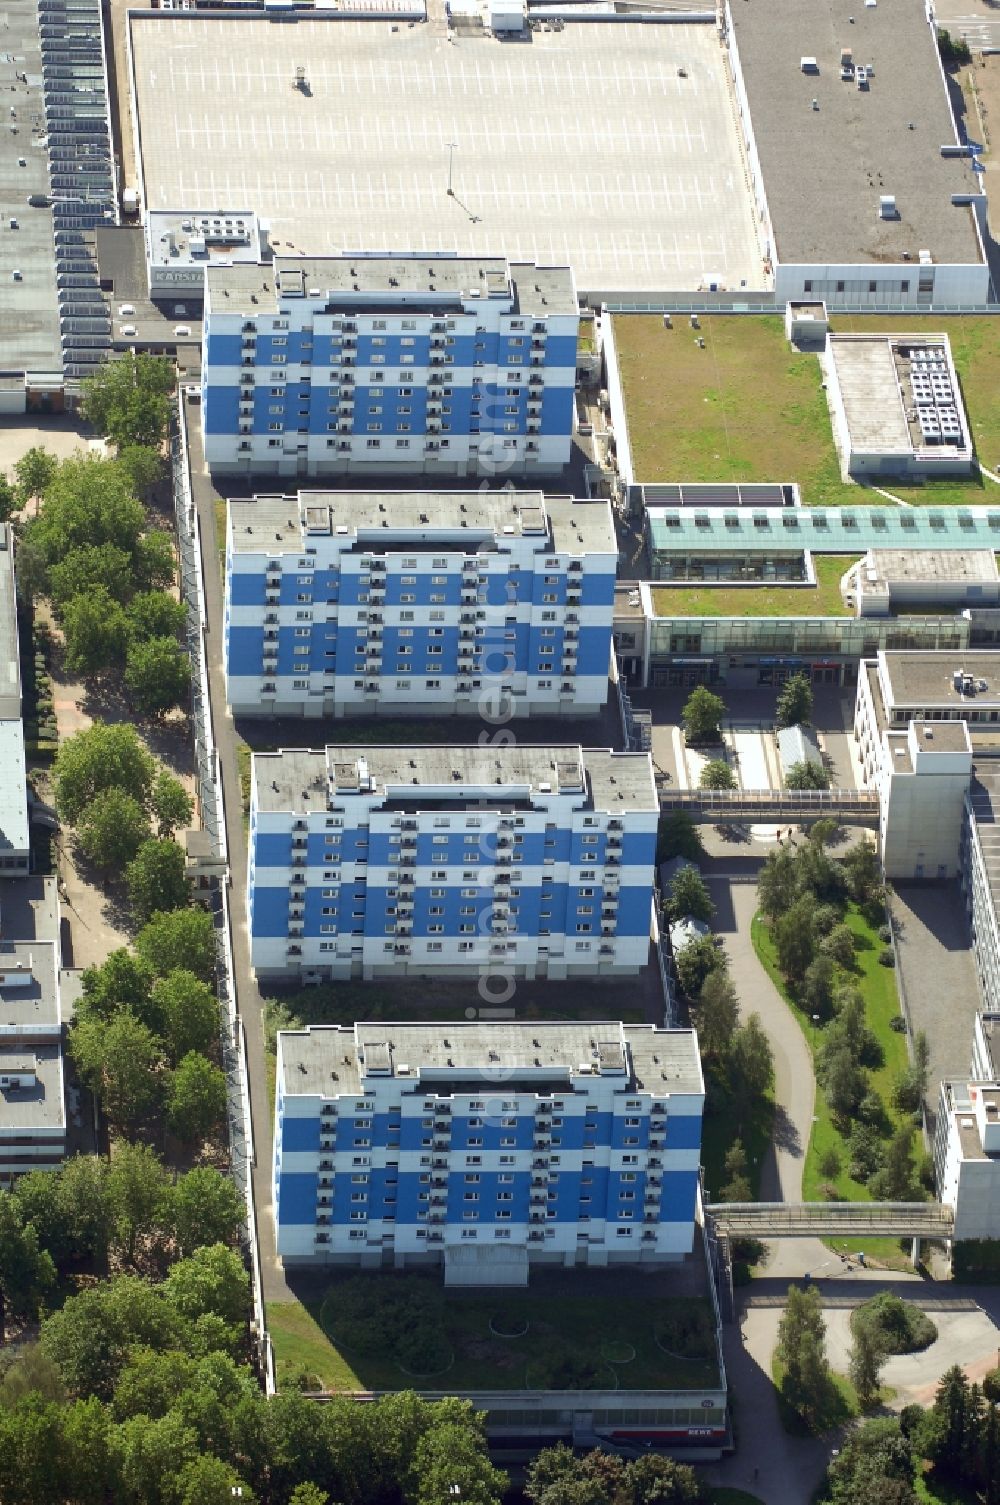 Norderstedt from above - Roof and wall structures in residential area of a multi-family house settlement on Herold Center in Norderstedt in the state Schleswig-Holstein, Germany